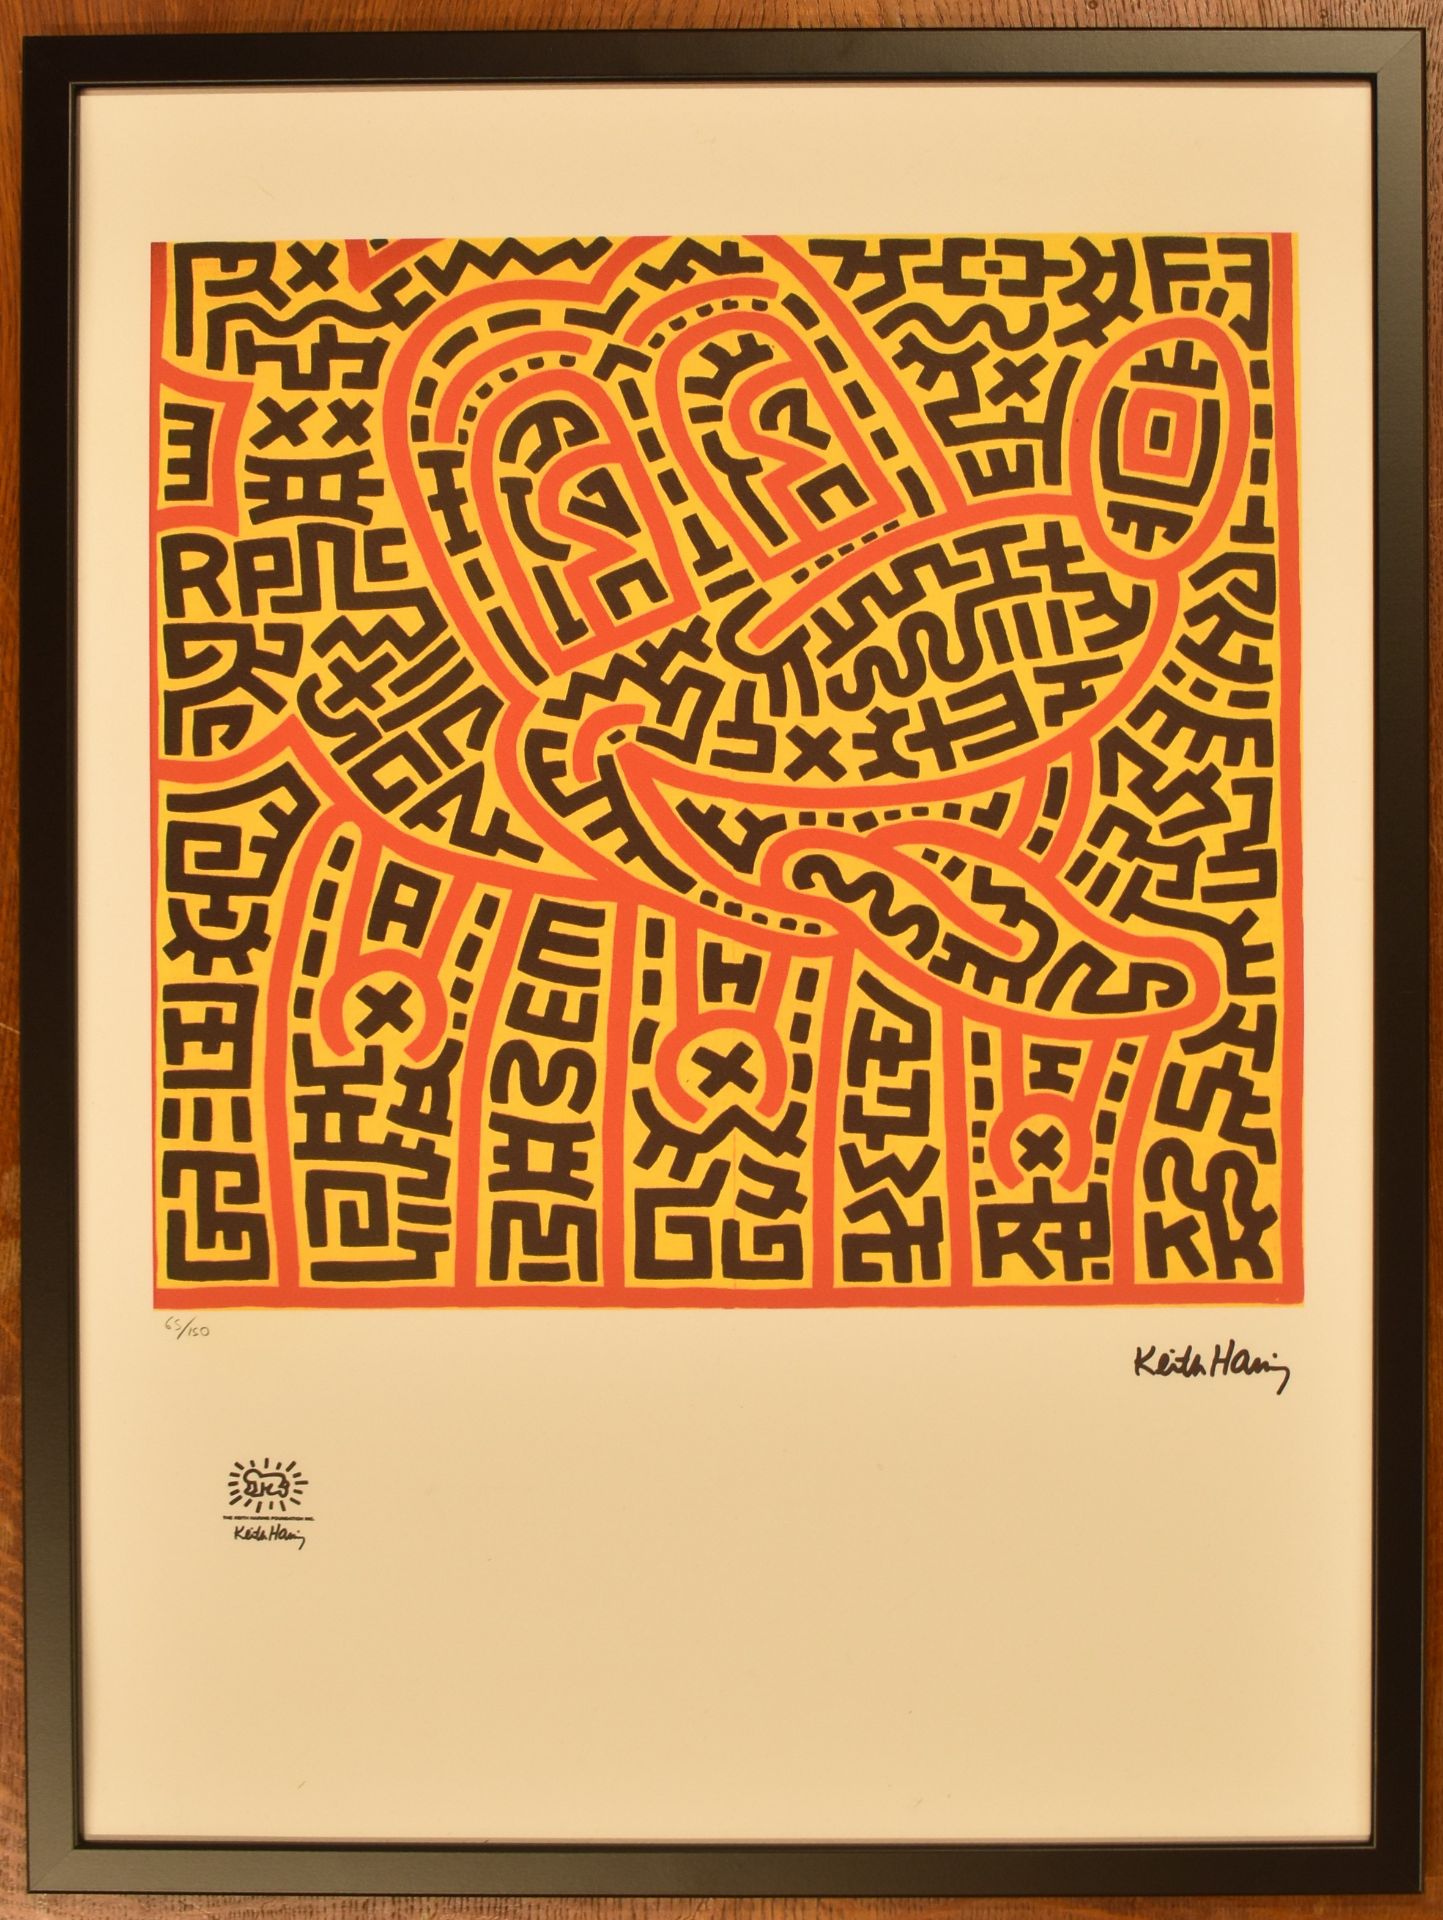 KEITH HARING - UNTITLED 1983 - LITHOGRAPH PRINT - Image 2 of 5